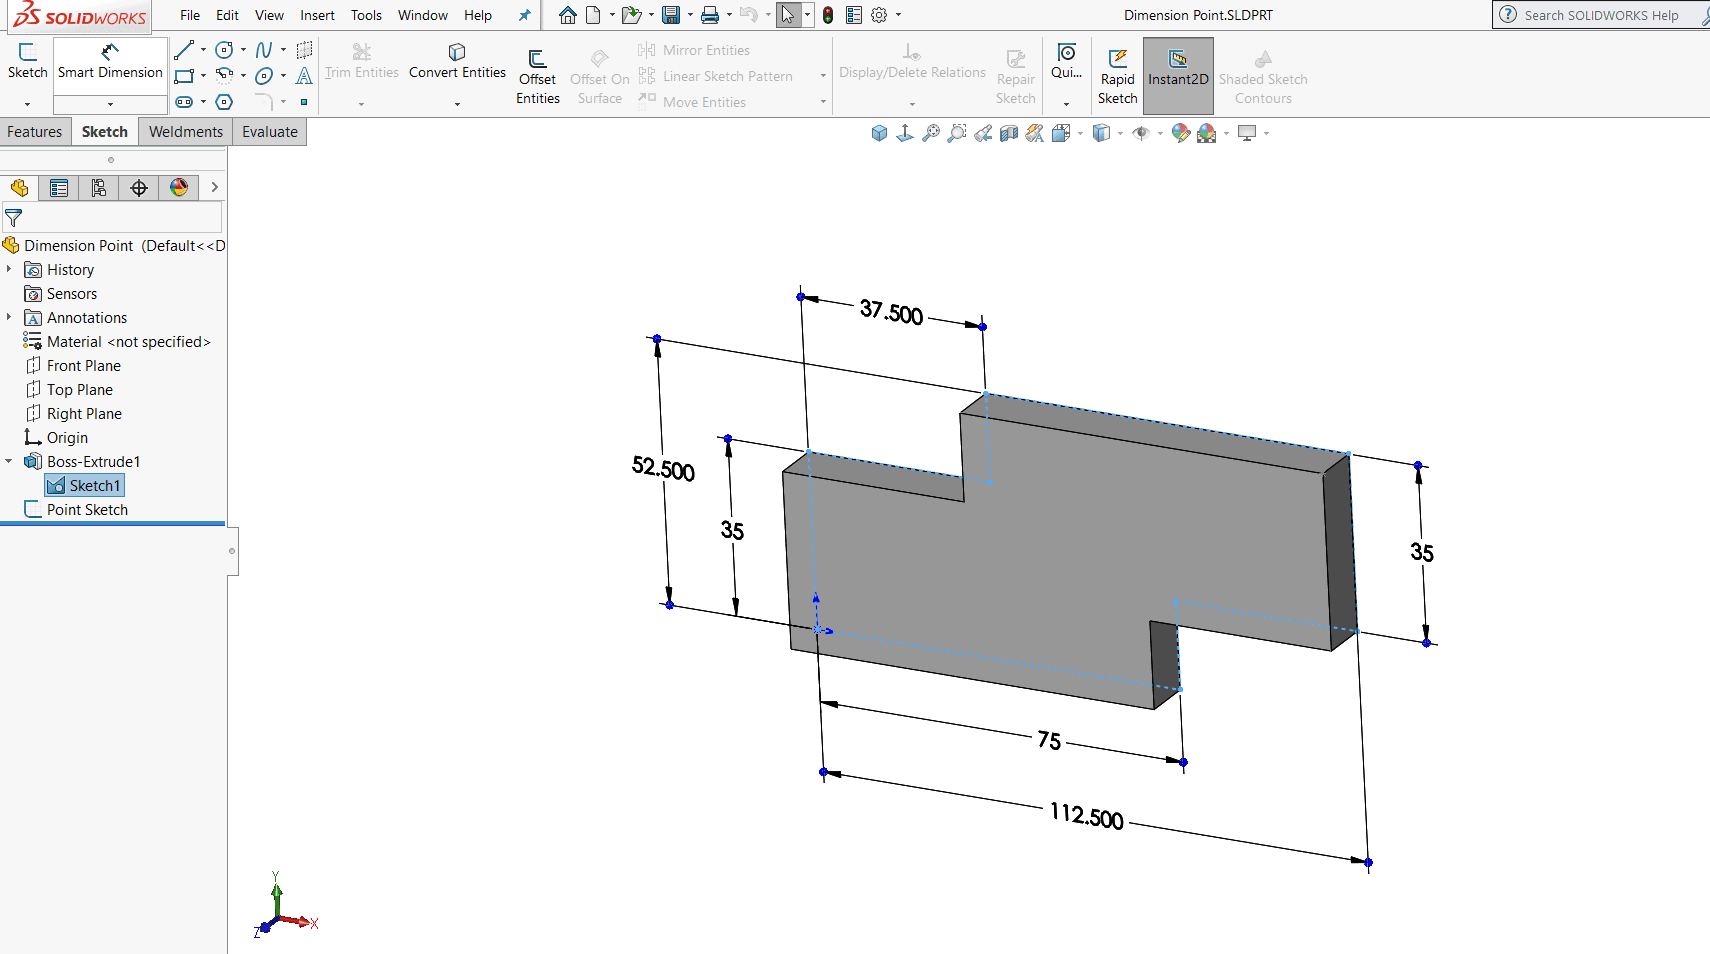 , SOLIDWORKS: How to Display Notes for X &amp; Y Coordinate Points in a Drawing